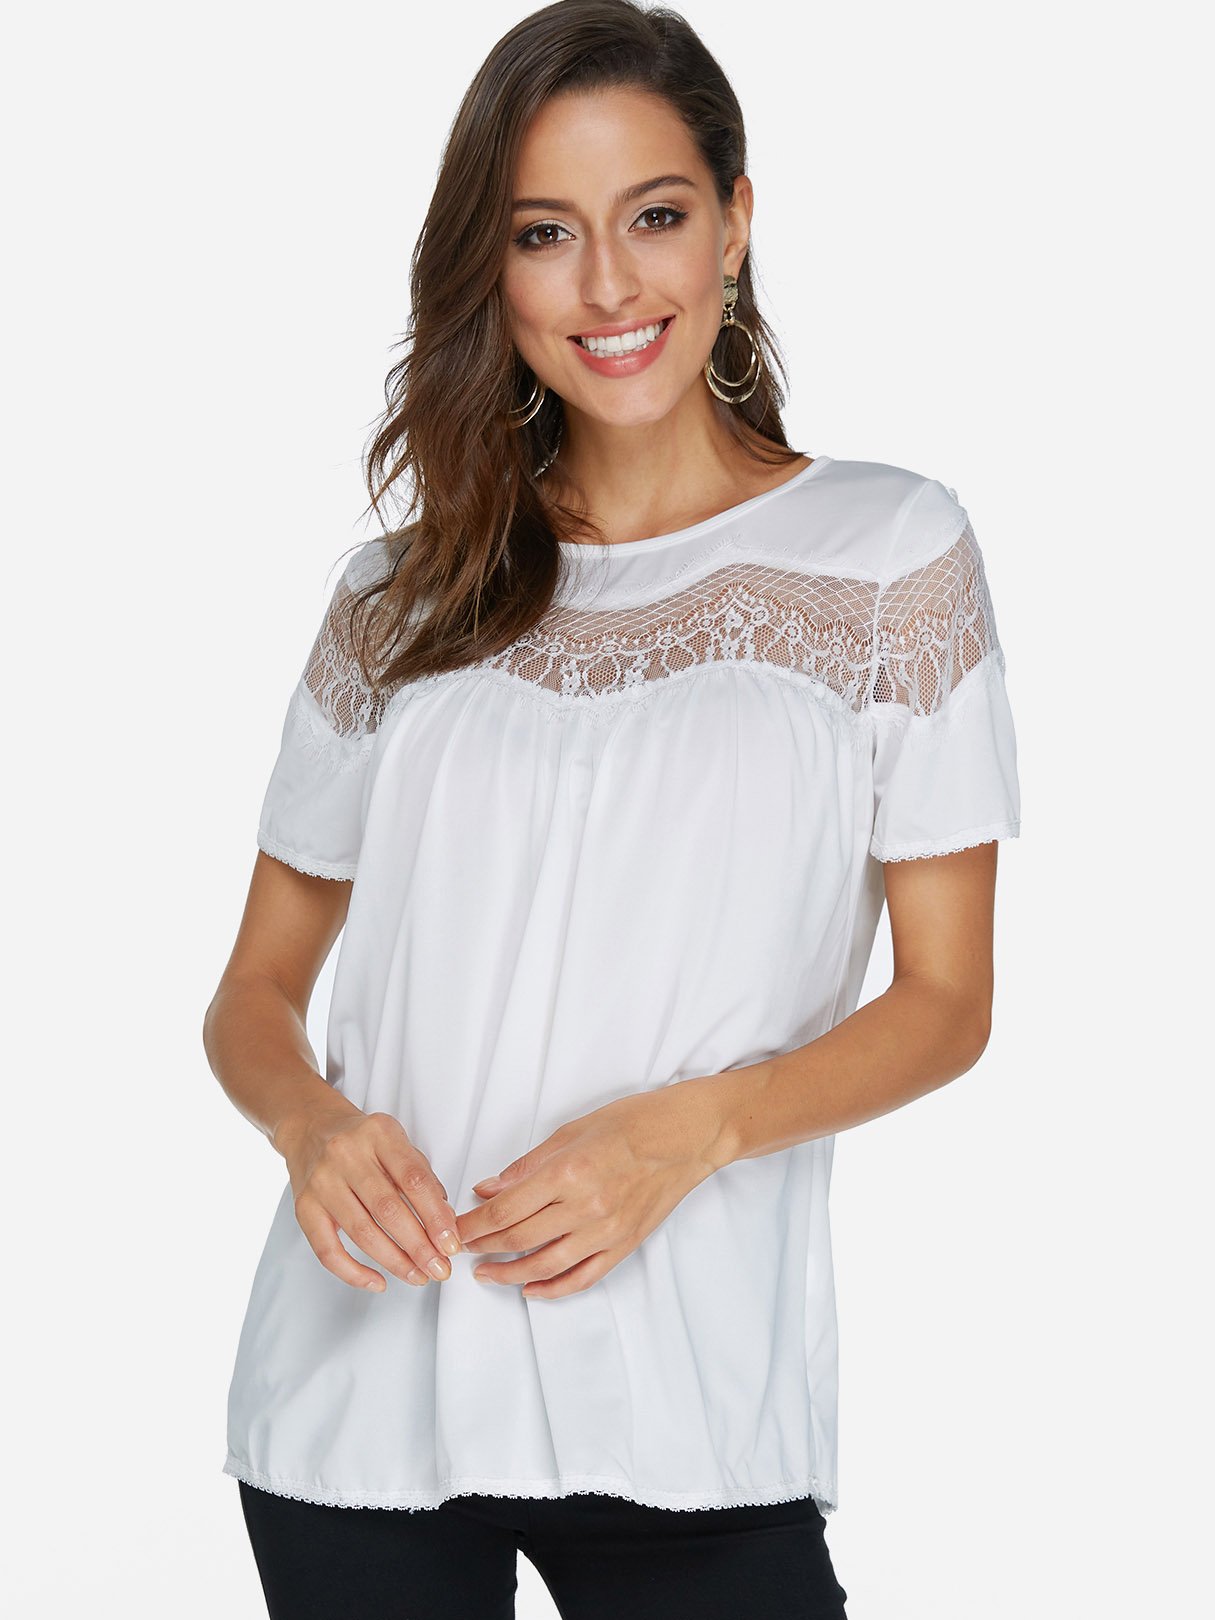 Wholesale Round Neck Lace Short Sleeve White Top